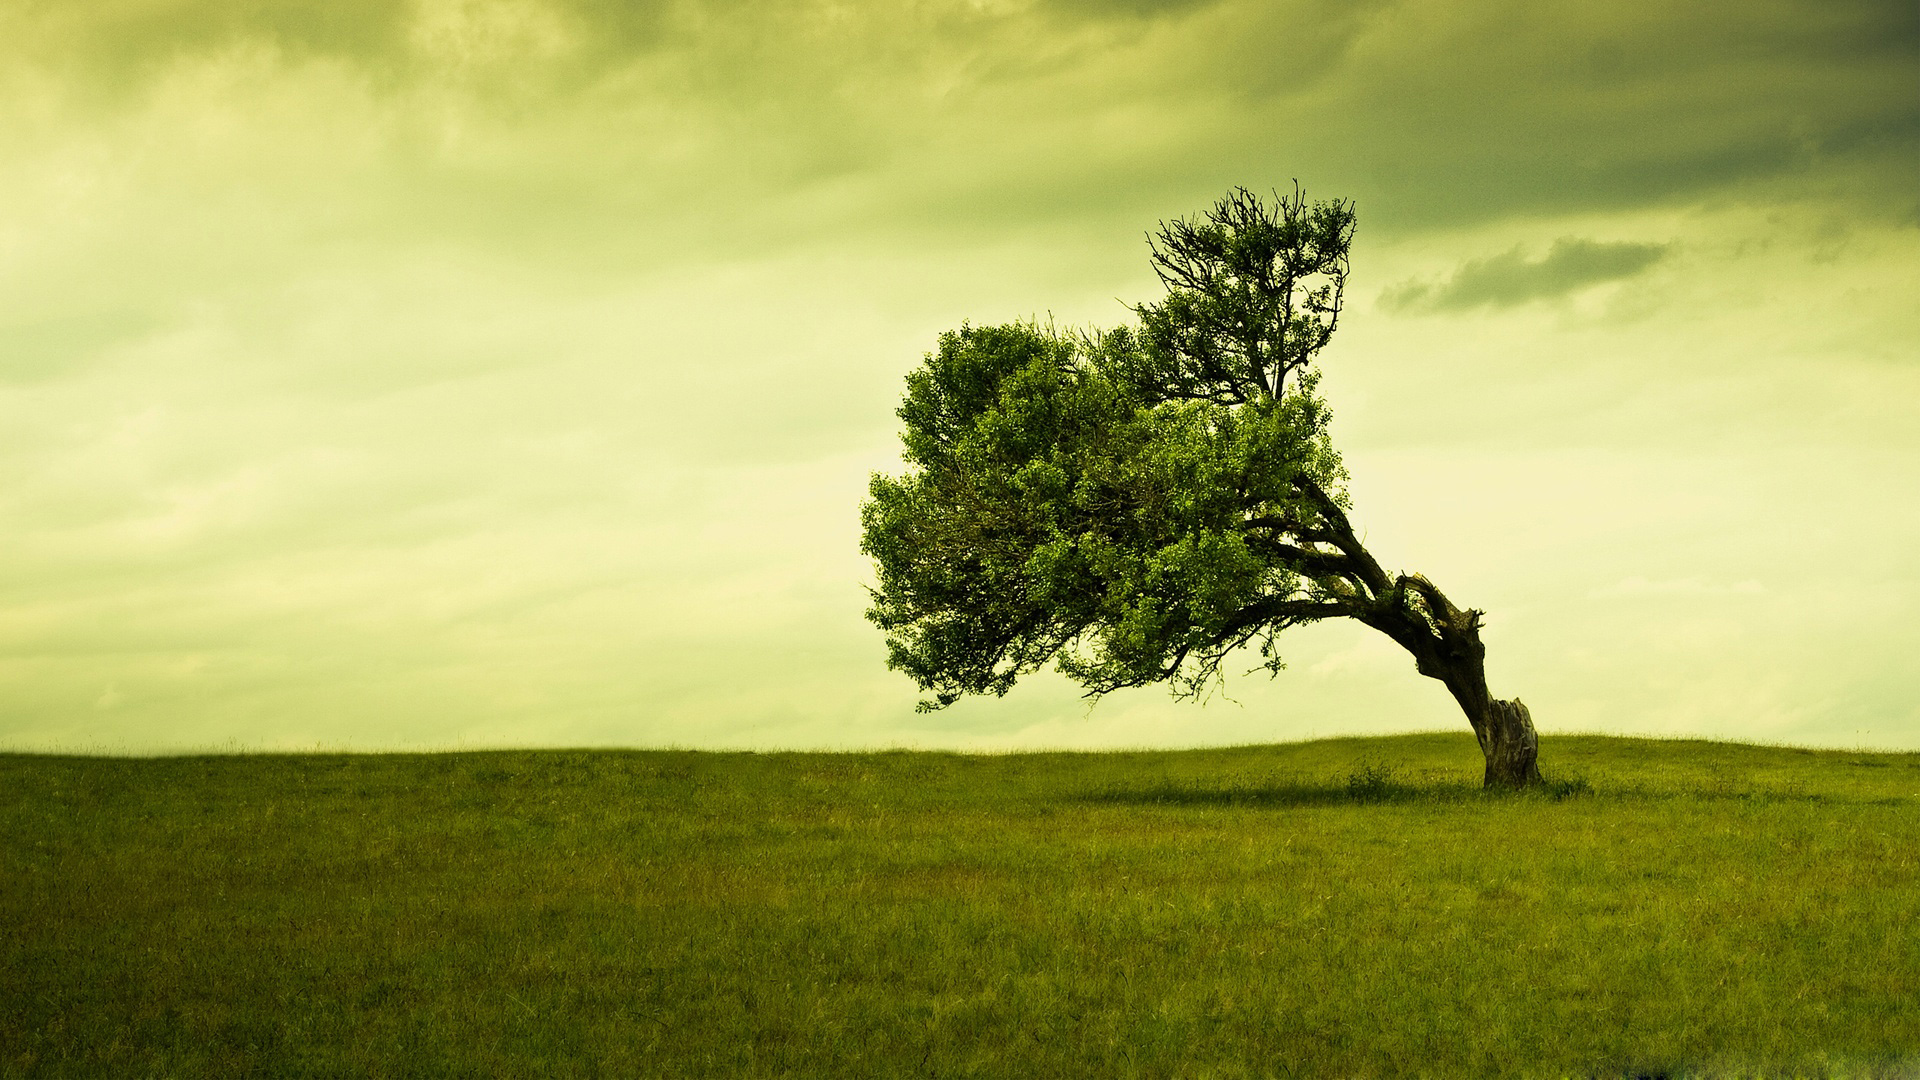 tree wallpaper,natural landscape,green,people in nature,nature,sky